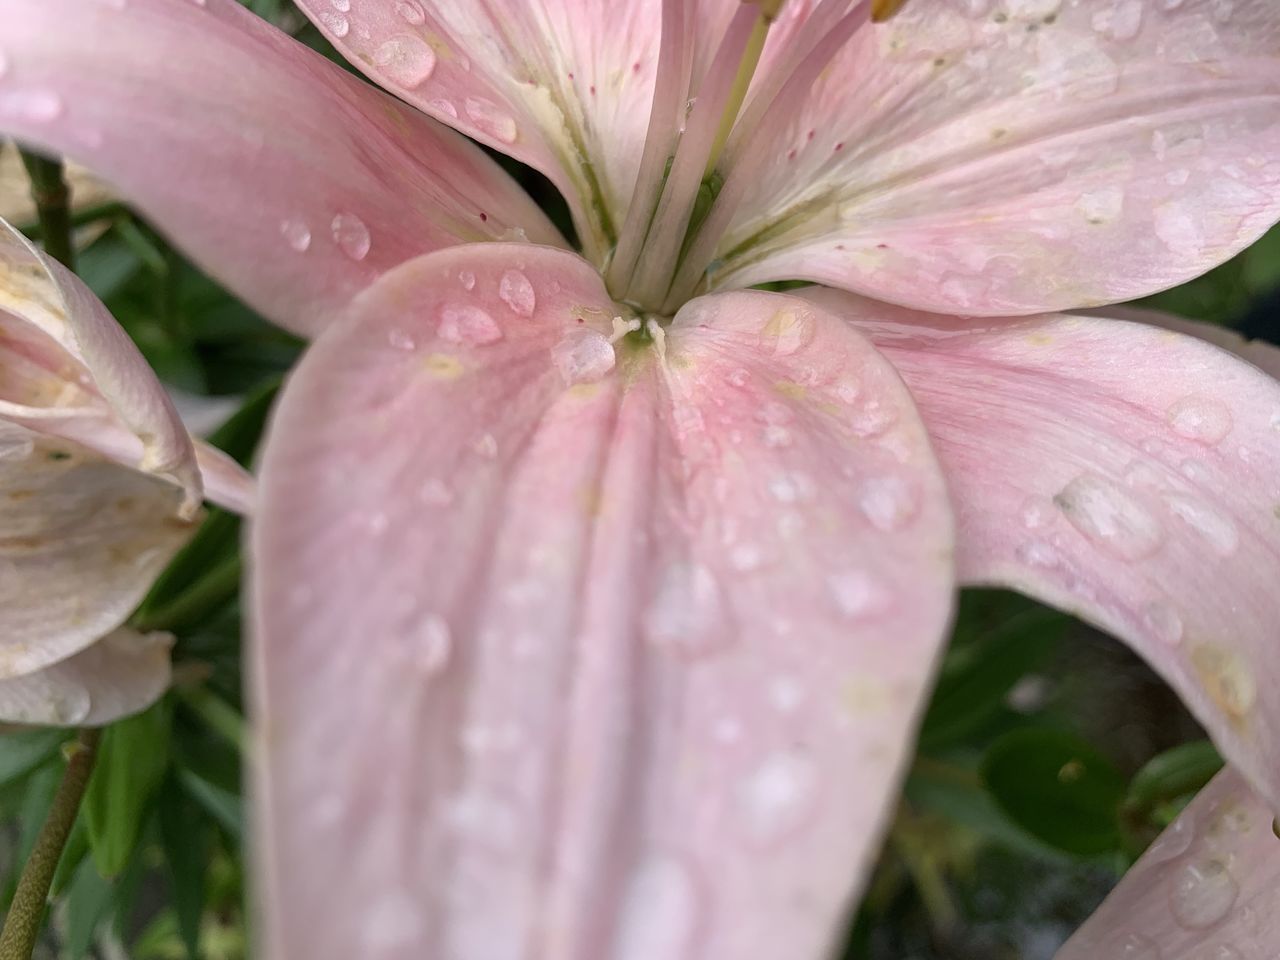 CLOSE-UP OF WATER DROPS ON PINK ROSE